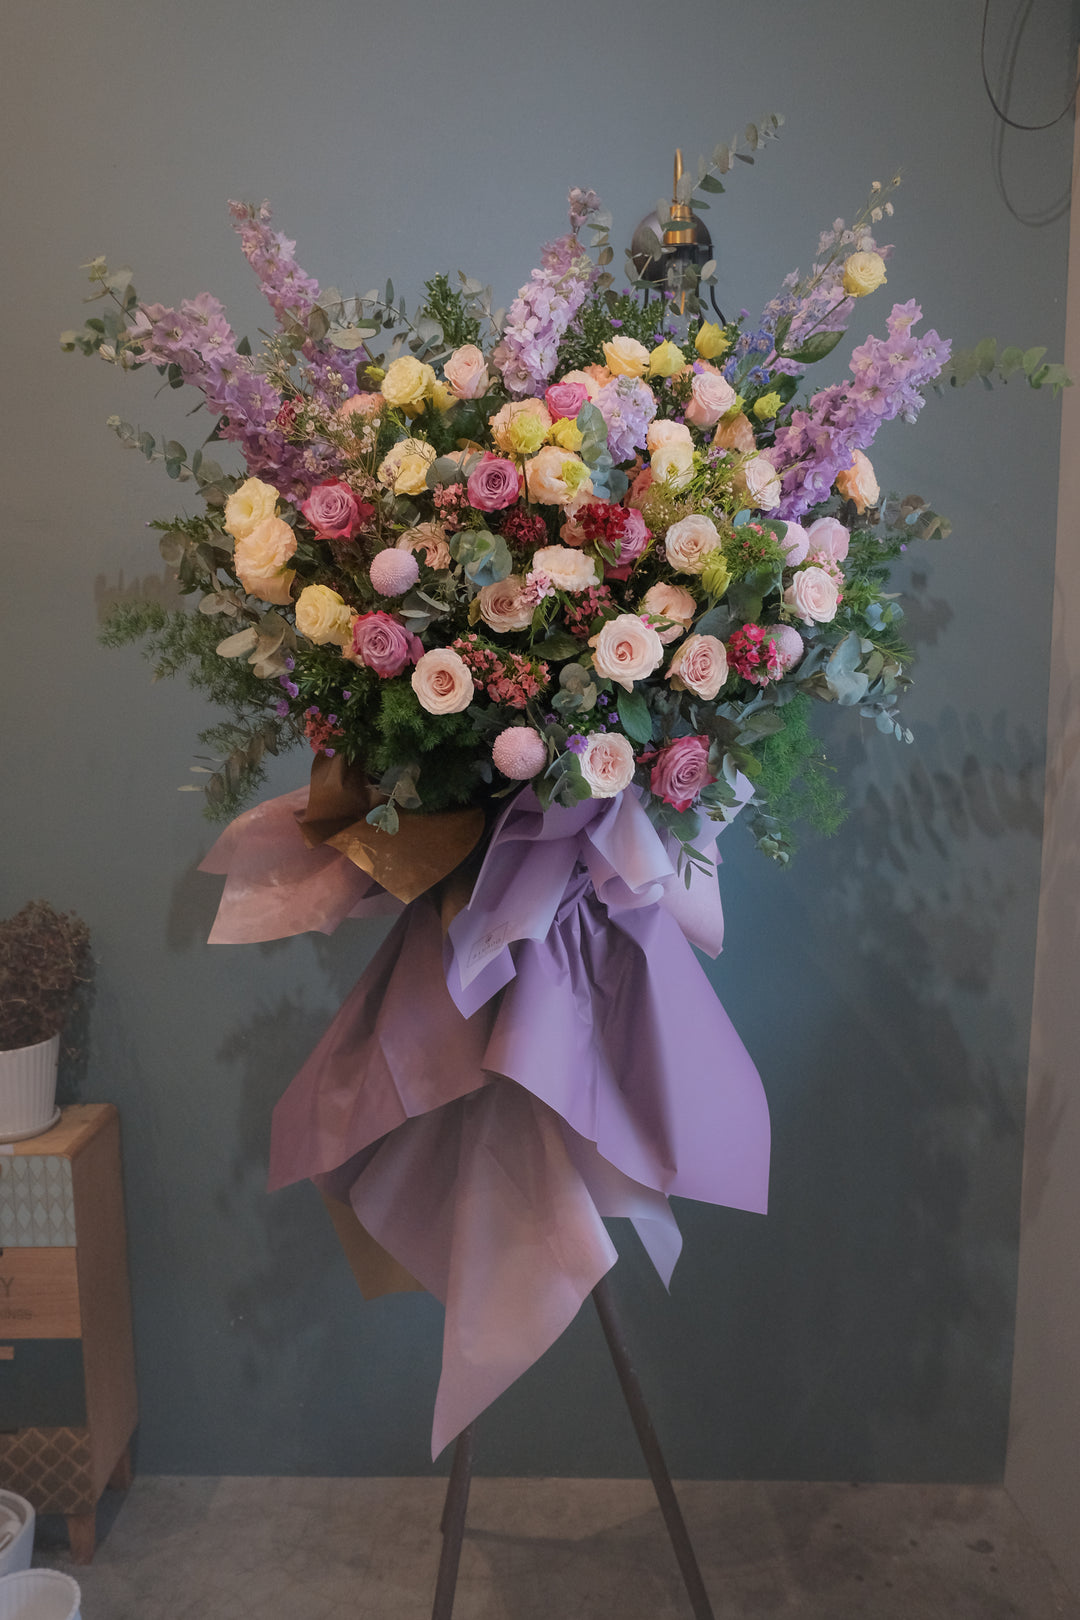 A medley of flowers arrangement for congratulatory or joyful event. For same day grand opening congratulations flowers delivery in Penang and Butterworth.